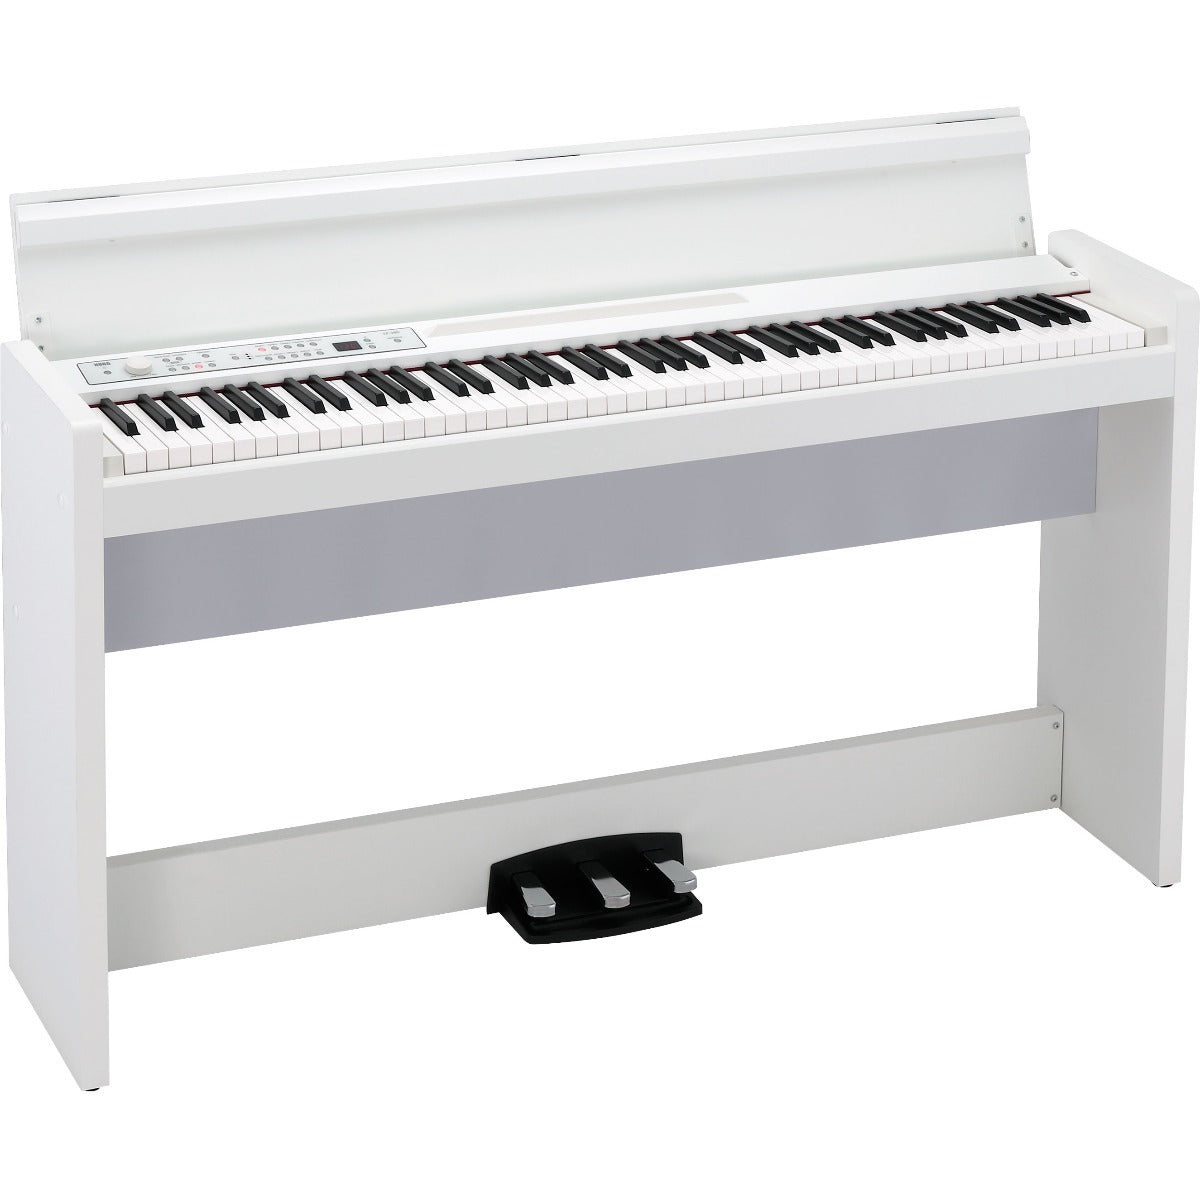 3/4 view of Korg LP-380U Digital Piano - White showing top, front and left side